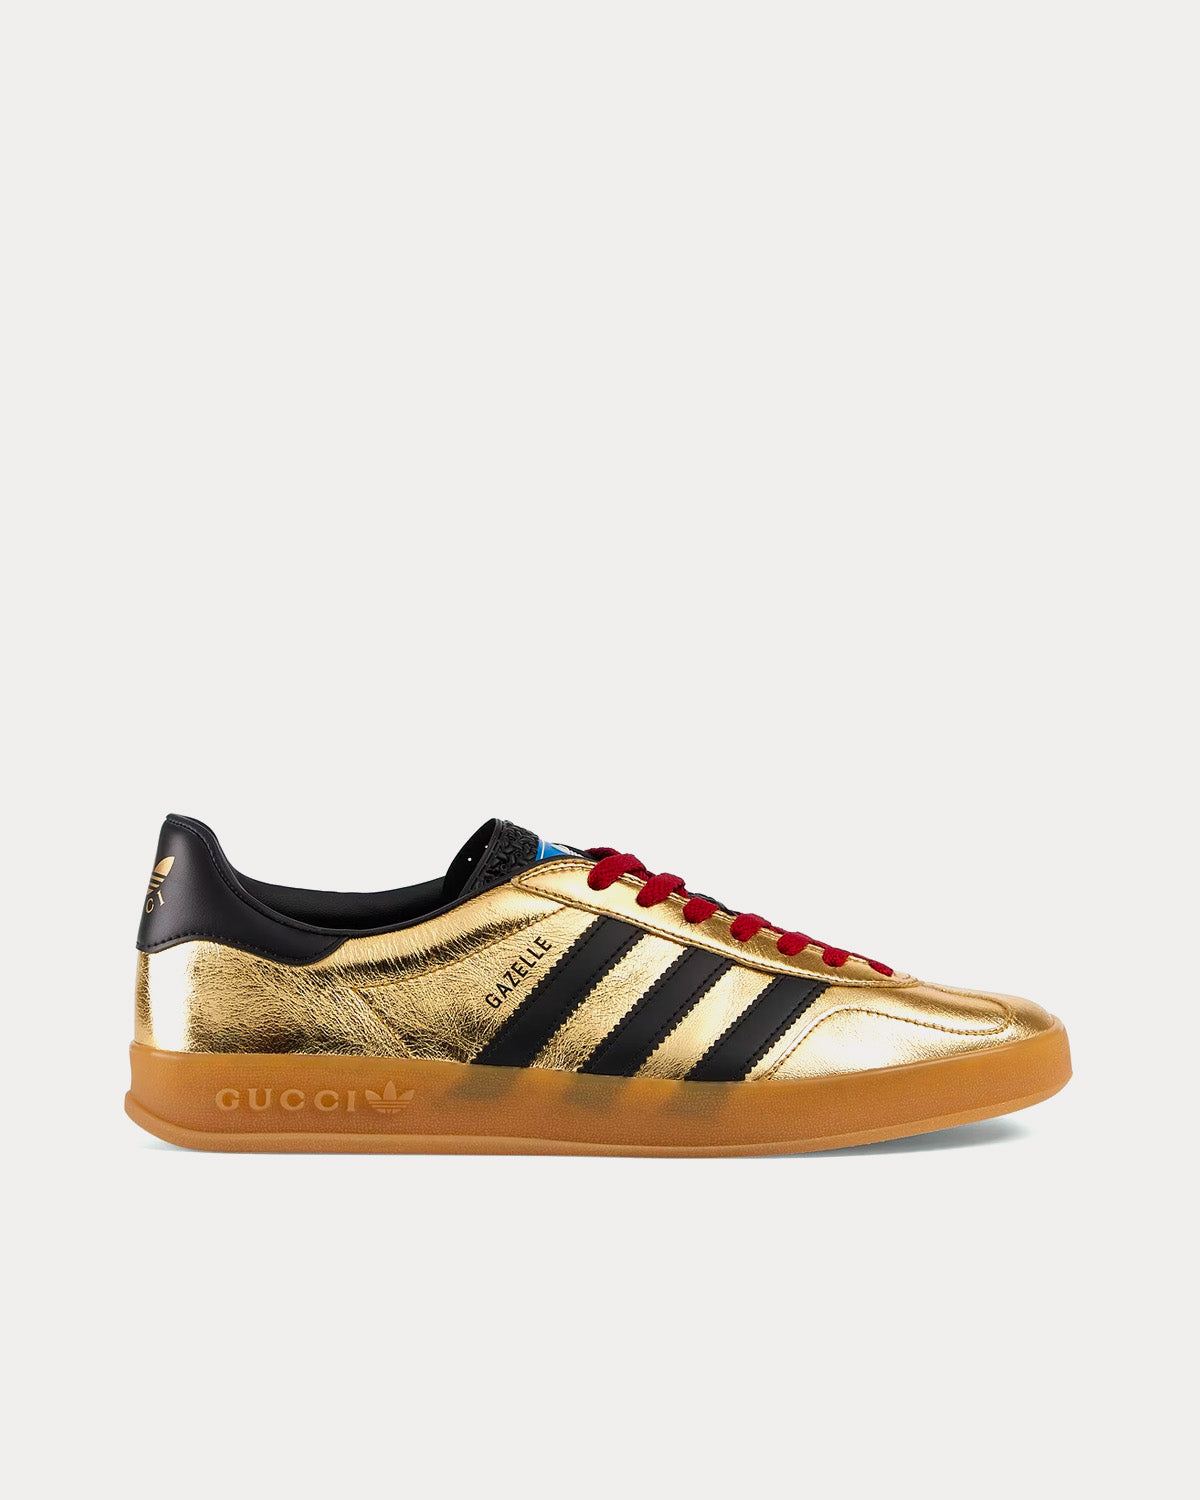 Adidas x Gucci - Gazelle Leather Metallic Gold Low Top Sneakers